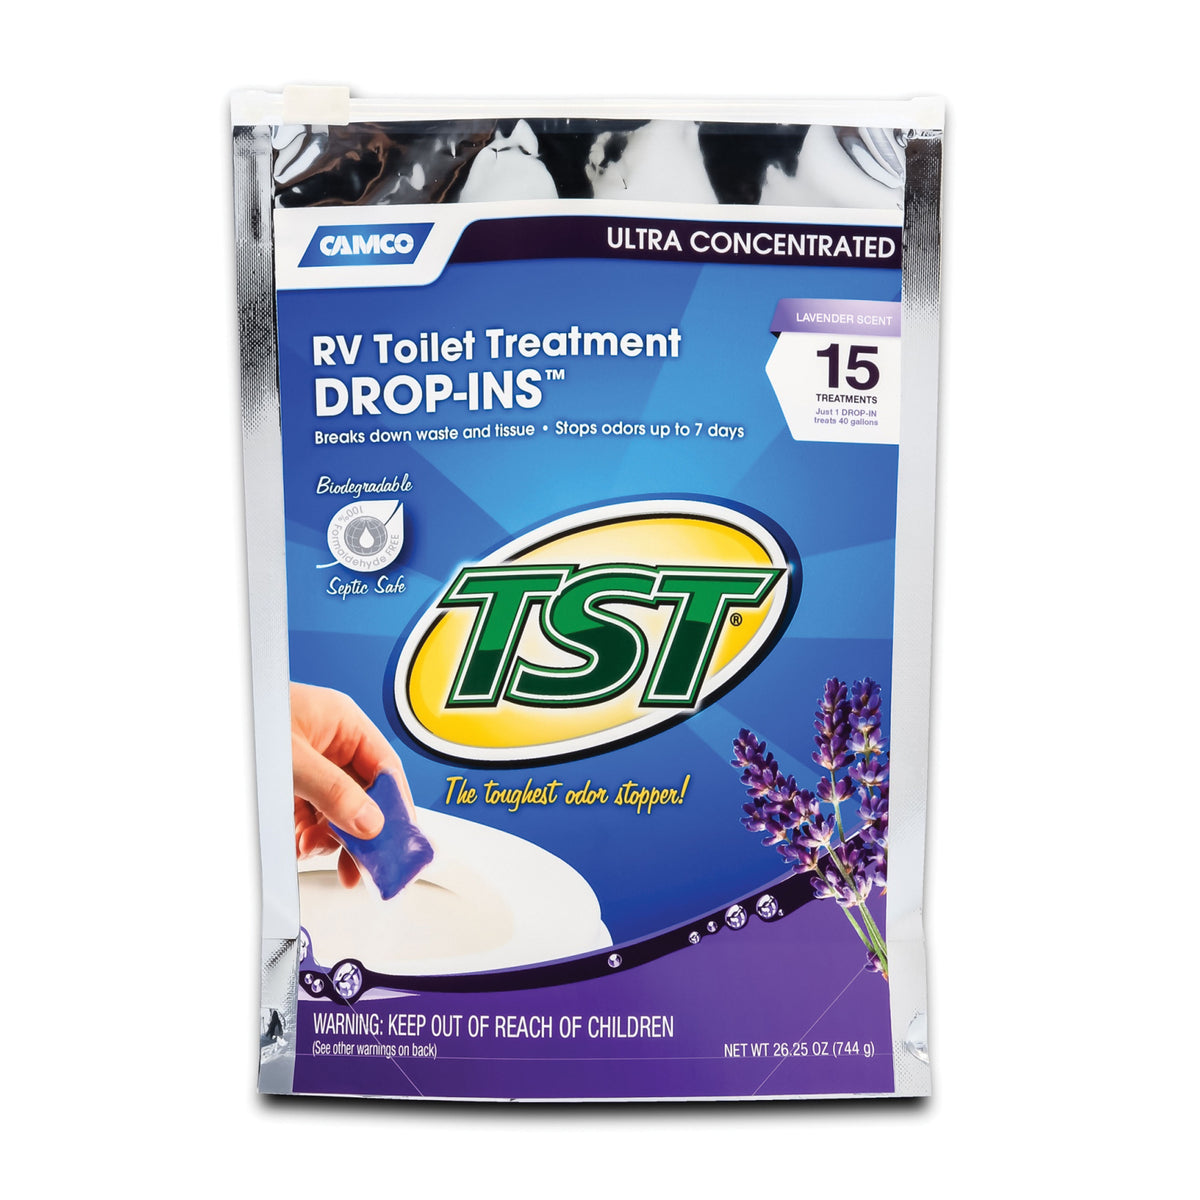 Camco 41559 Tst Lavender Holding Tank Treatment - Drop-Ins, 15 Pack